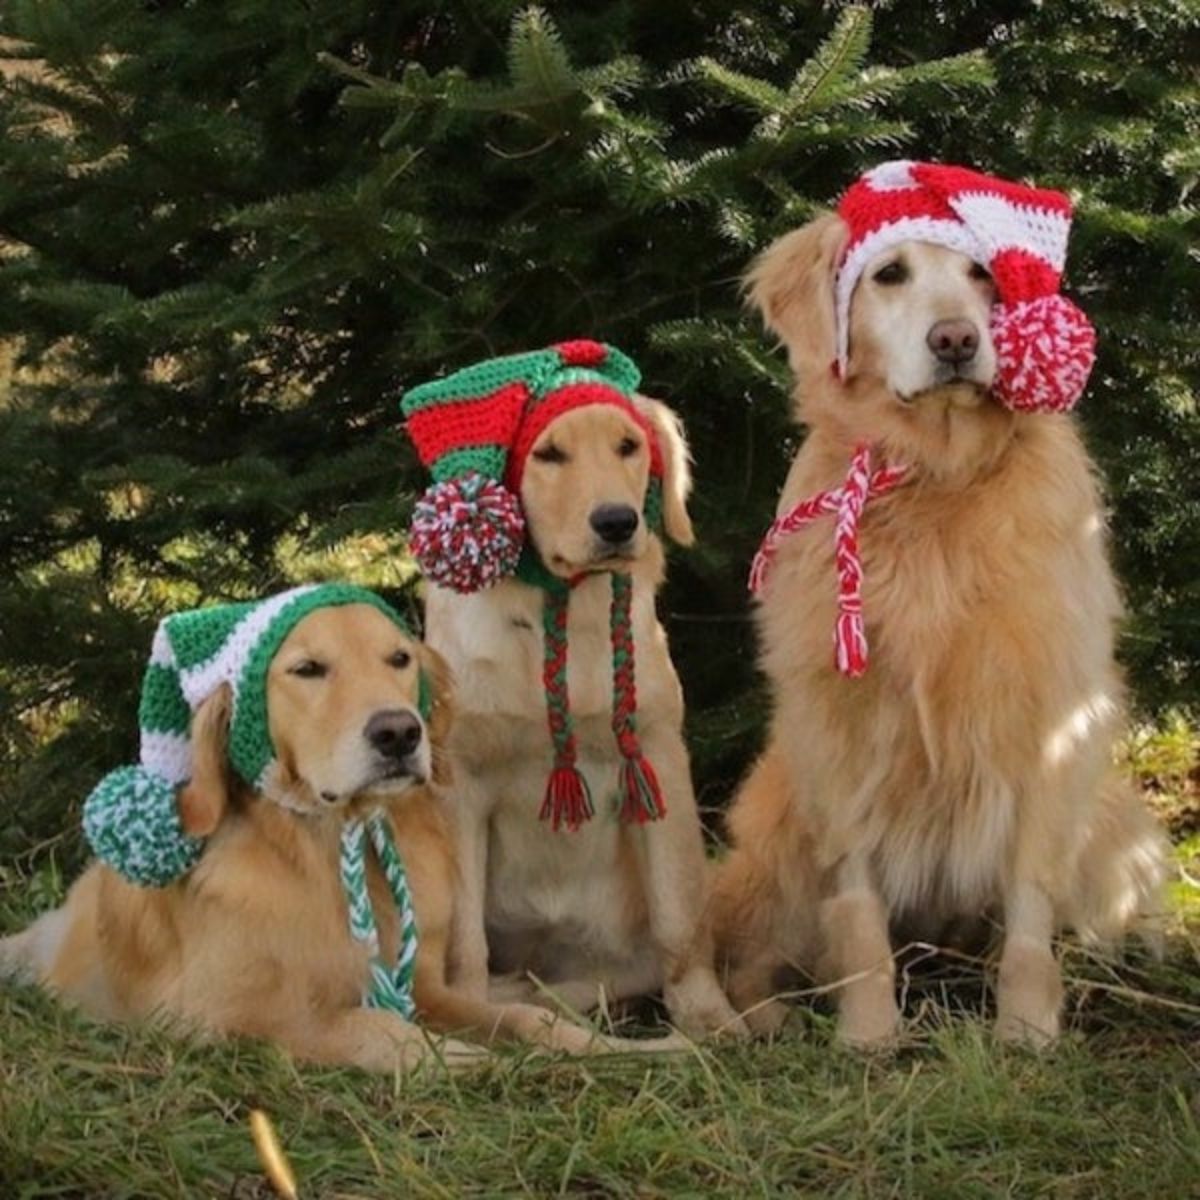 3 golden retrievers wearing green and white, green and red and red and white festive crocheted hats